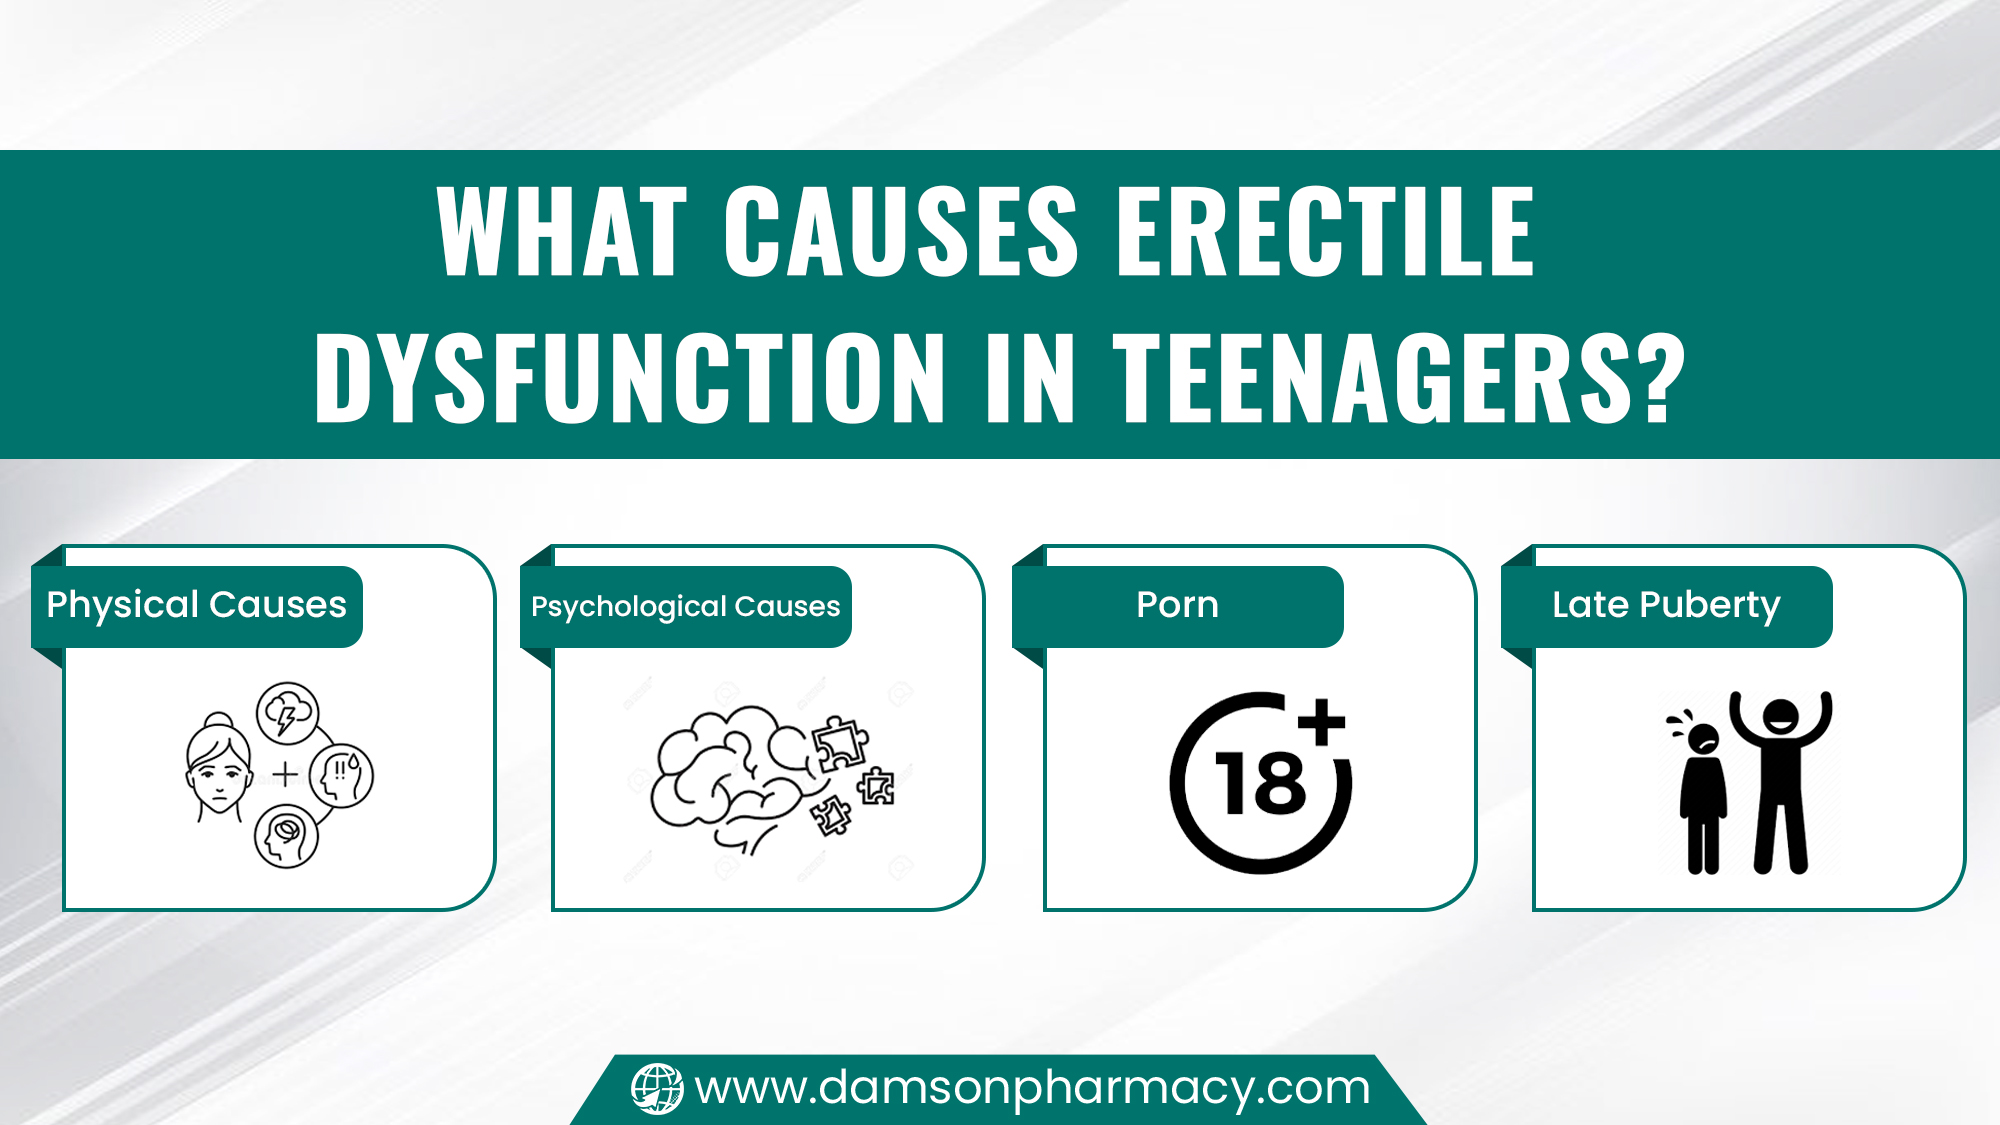 What Causes Erectile Dysfunction in Teenagers